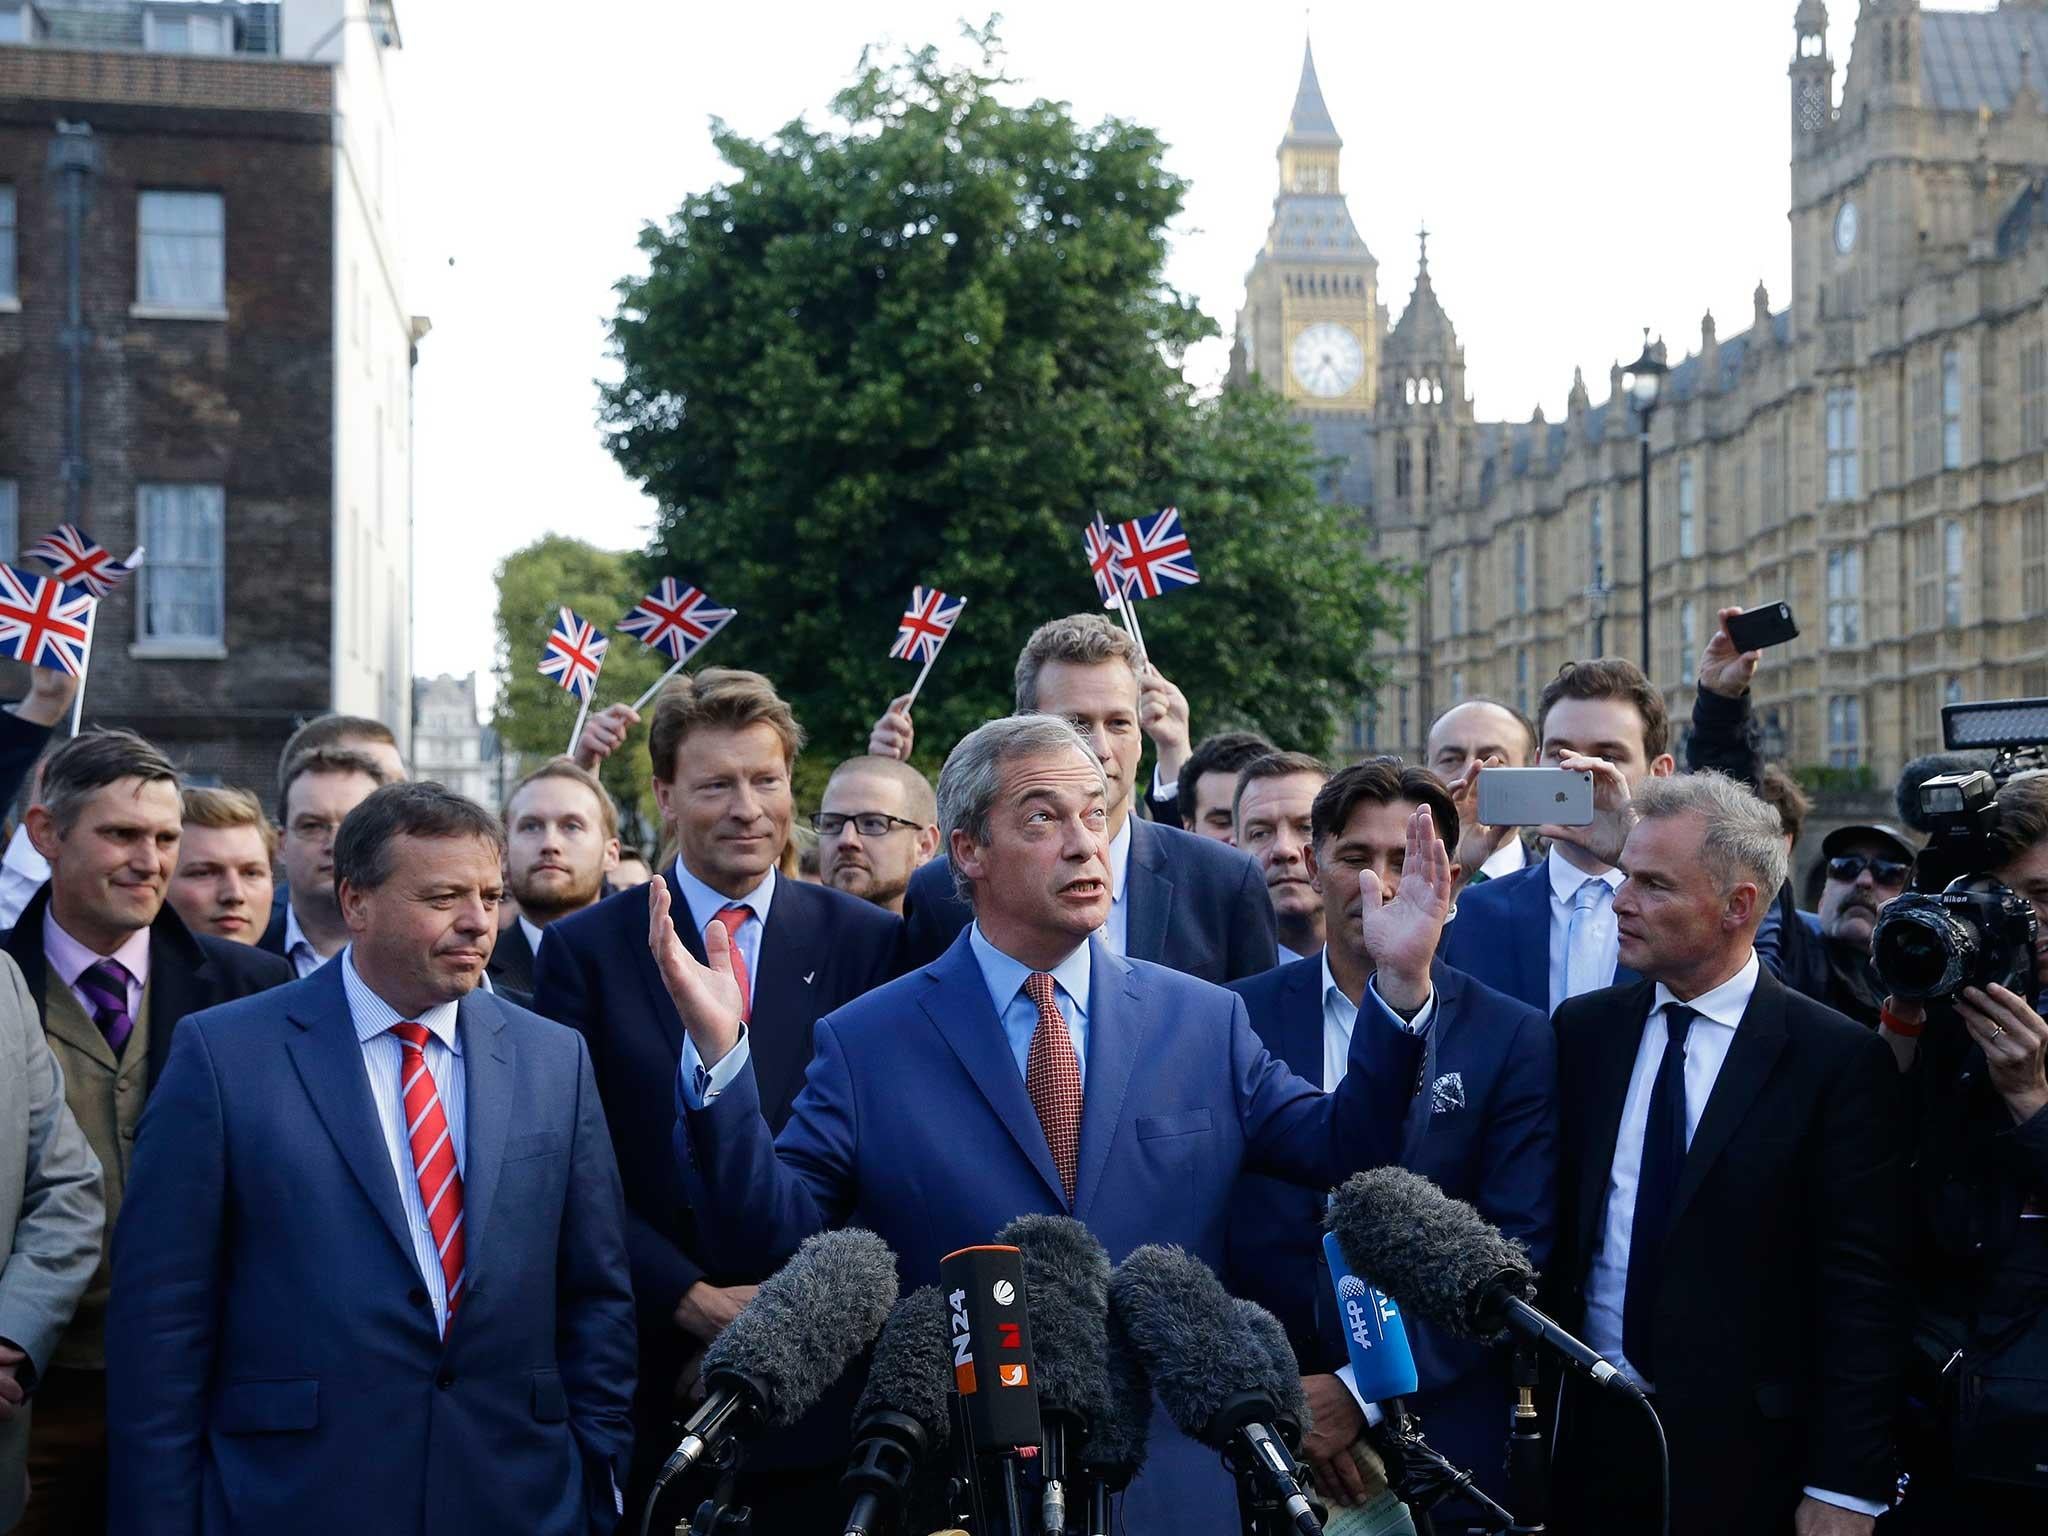 Nigel Farage, leader of Ukip, speaks to the media on College Green in London after Britain voted to leave the European Union